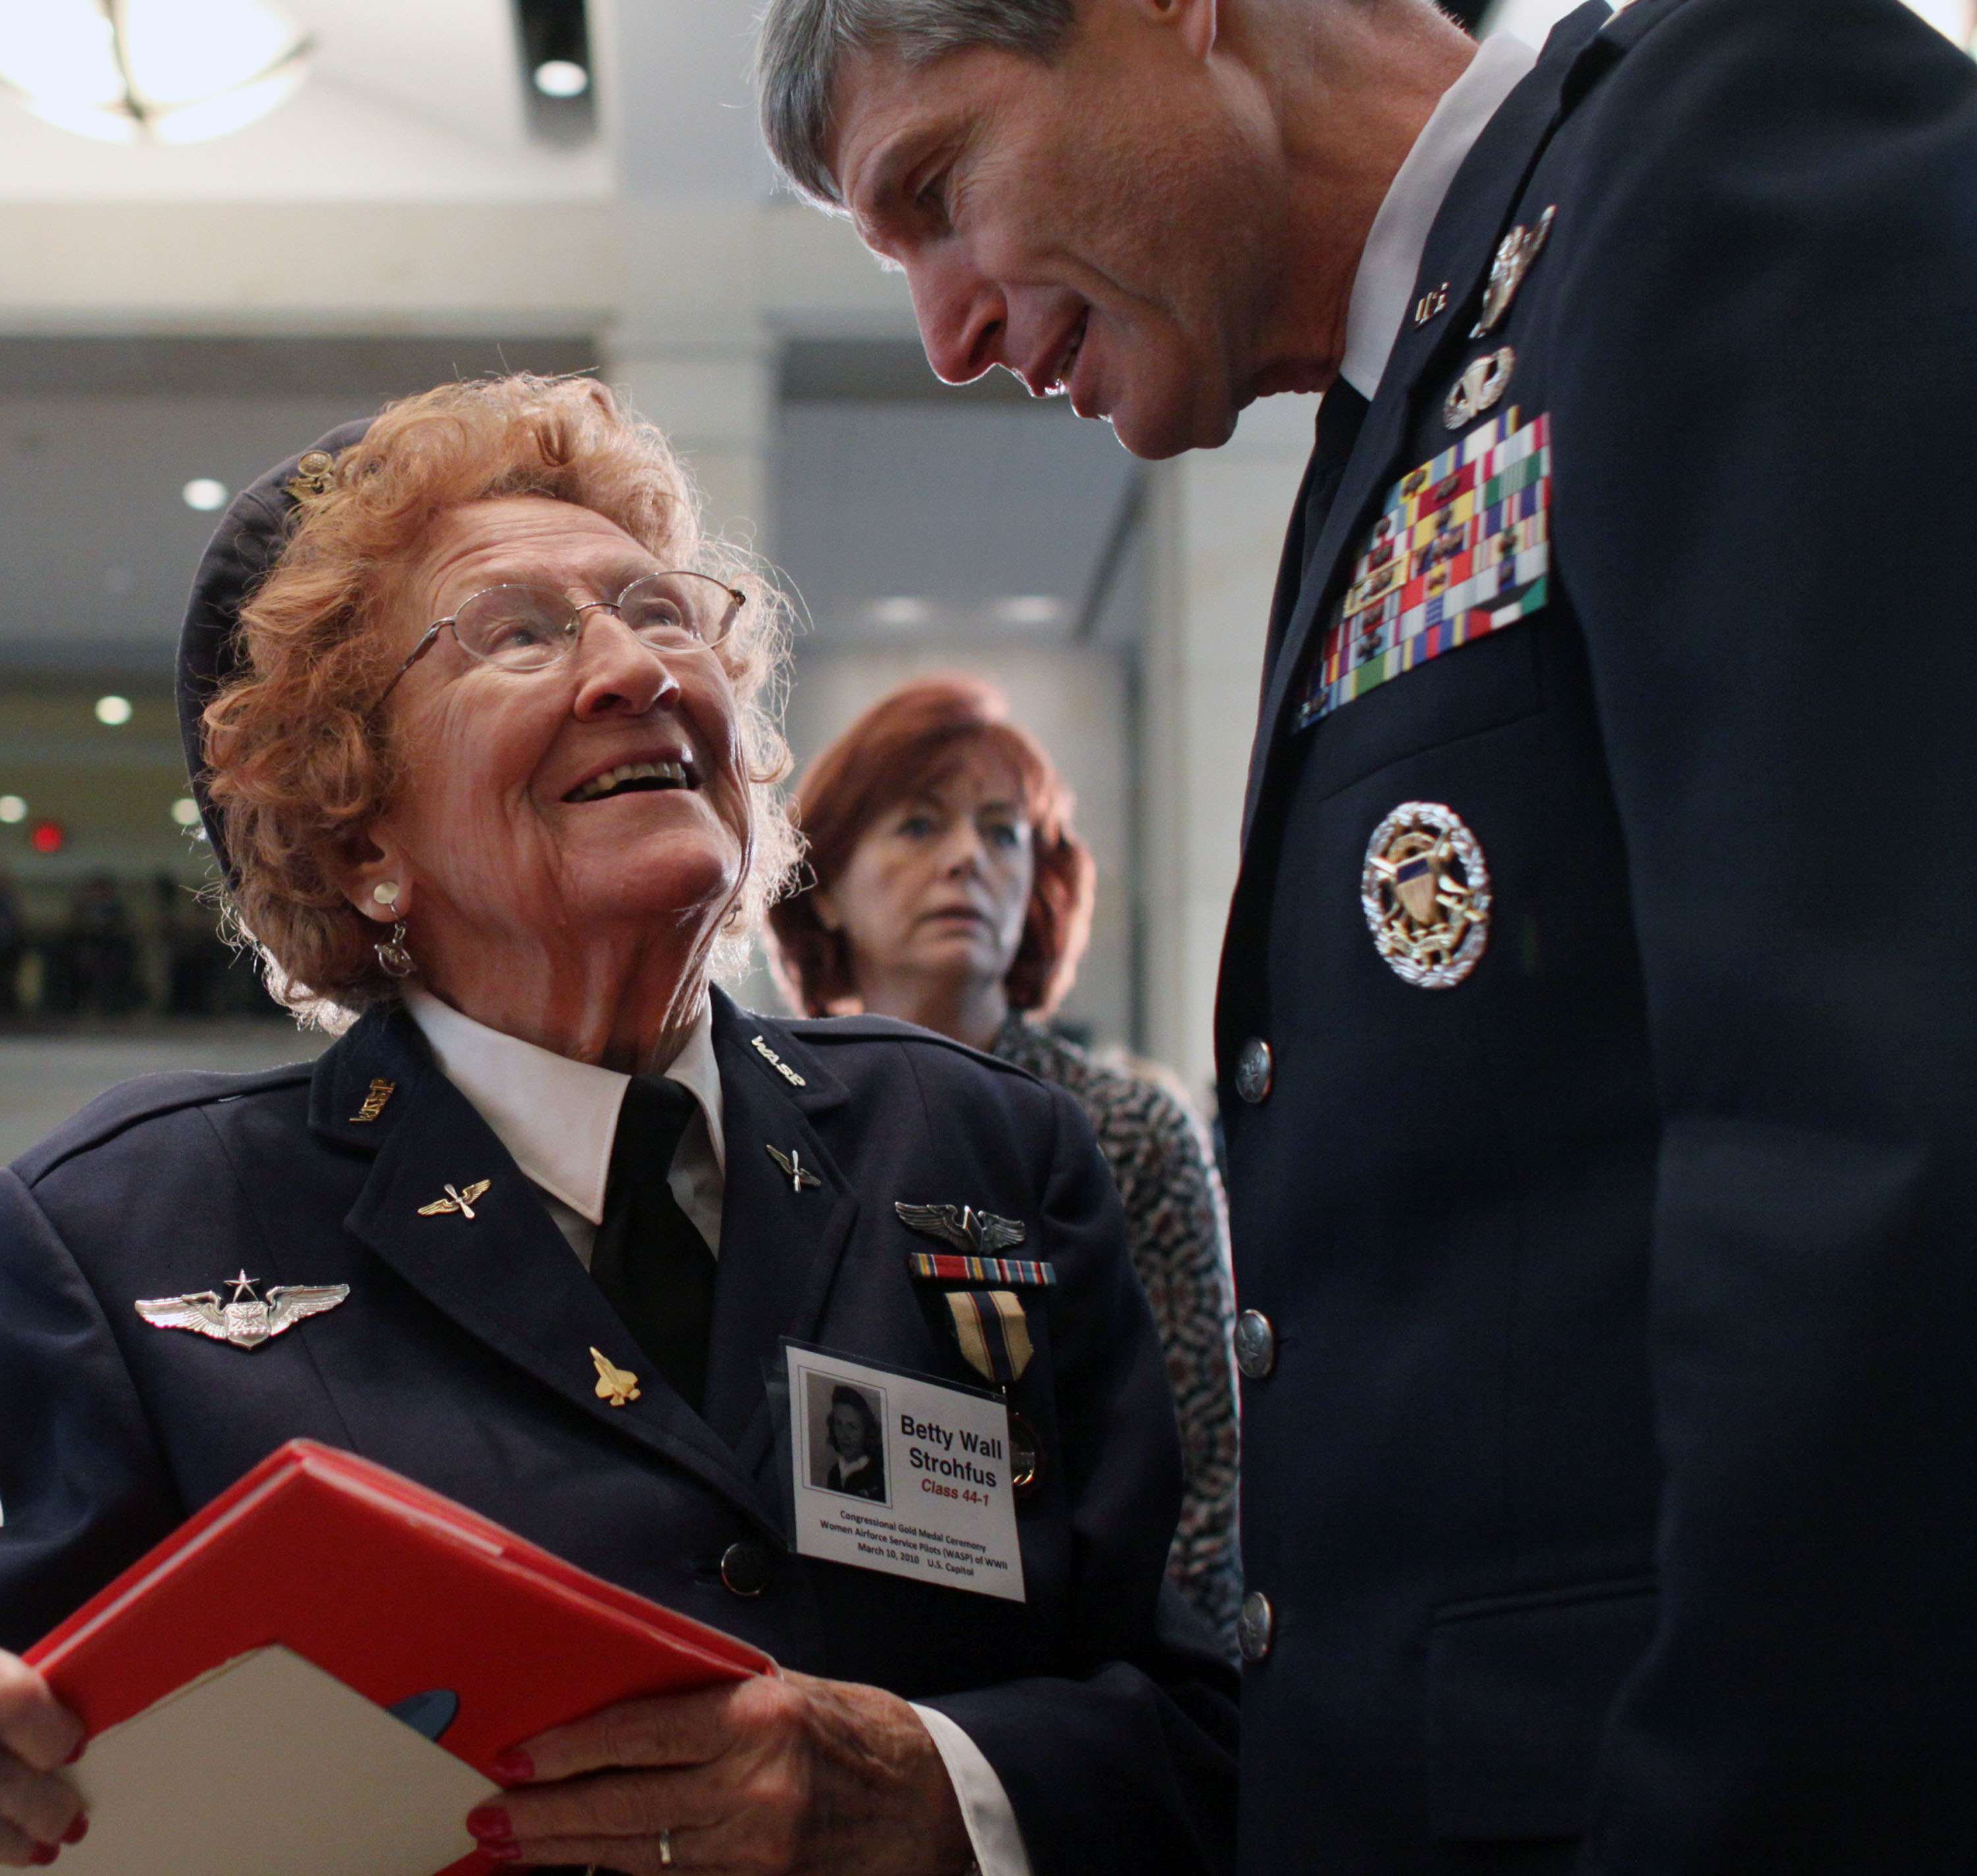 Air Force Chief of Staff Gen. Norton Schwartz greets Betty Wall Strohfus of Faribault, Minn., on Capitol Hill on  March 10, 2010, before she and other members of the Women Airforce Service Pilots were awarded the Congressional Gold Medal. (AP Photo/Lauren Victoria Burke)